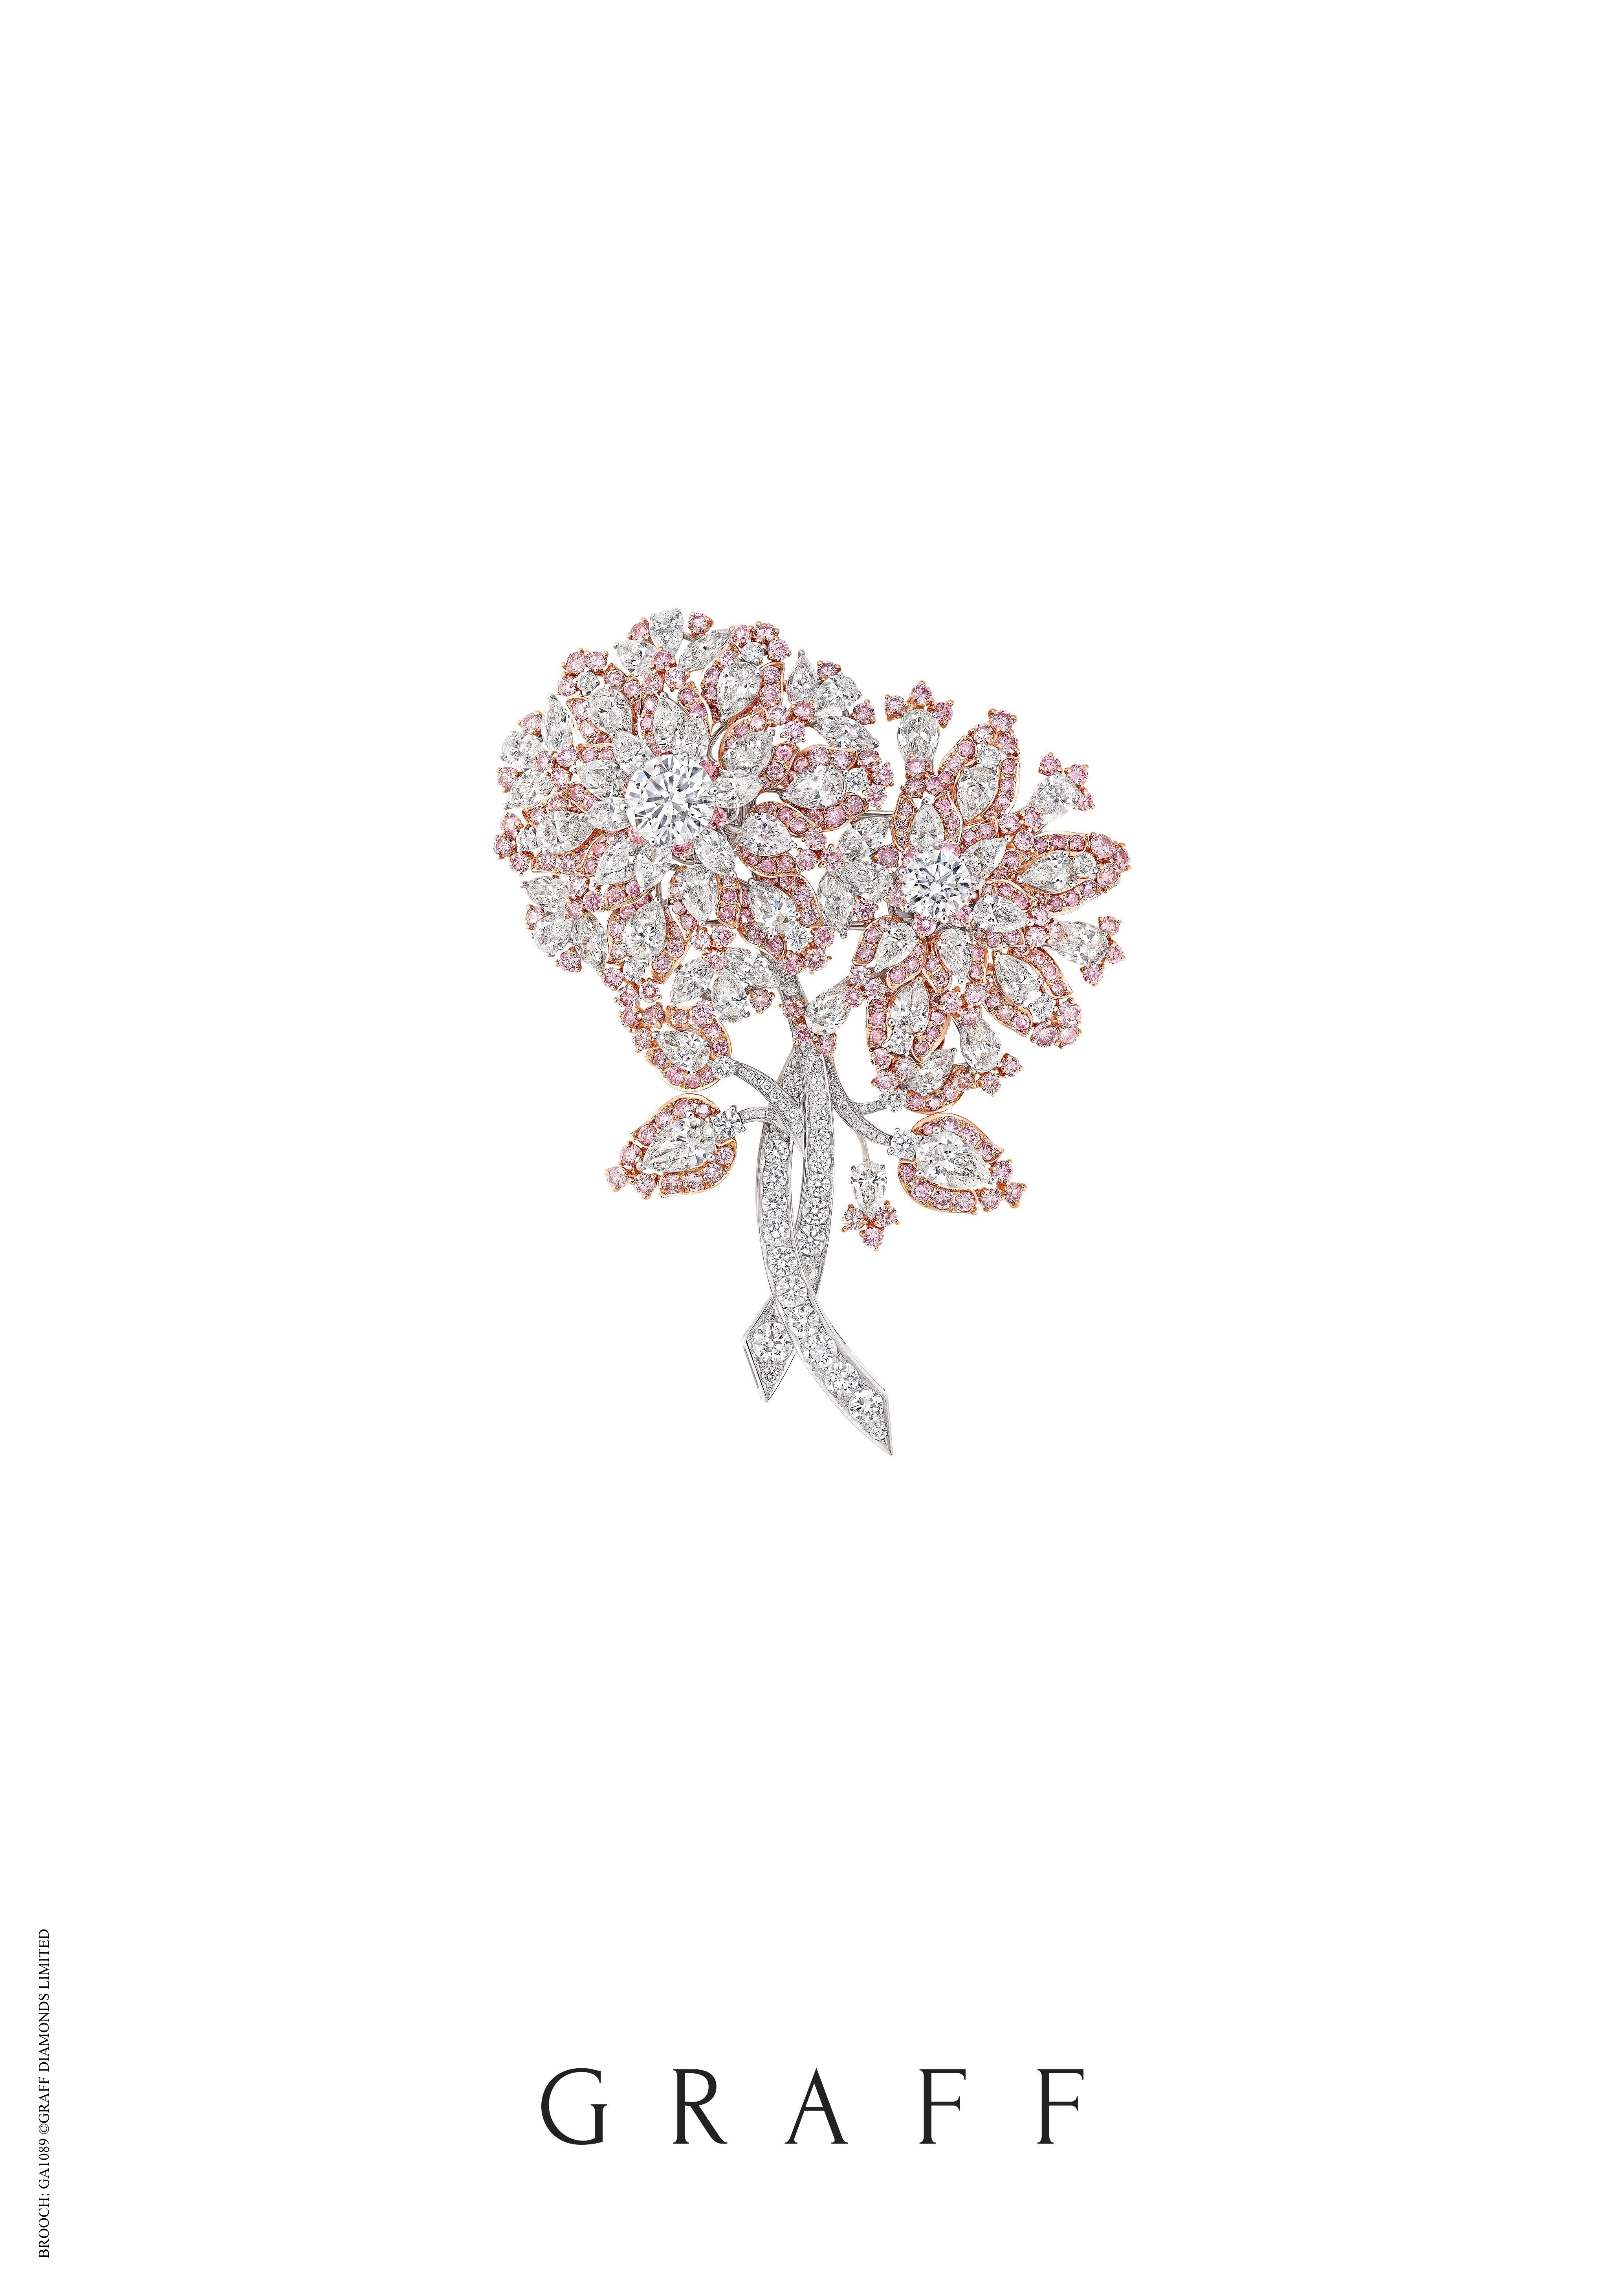 A pink and white diamond brooch from Graff – the likes of which will be a lot rarer when Rio Tinto’s Argyle mine closes in Western Australia. Photo: Graff